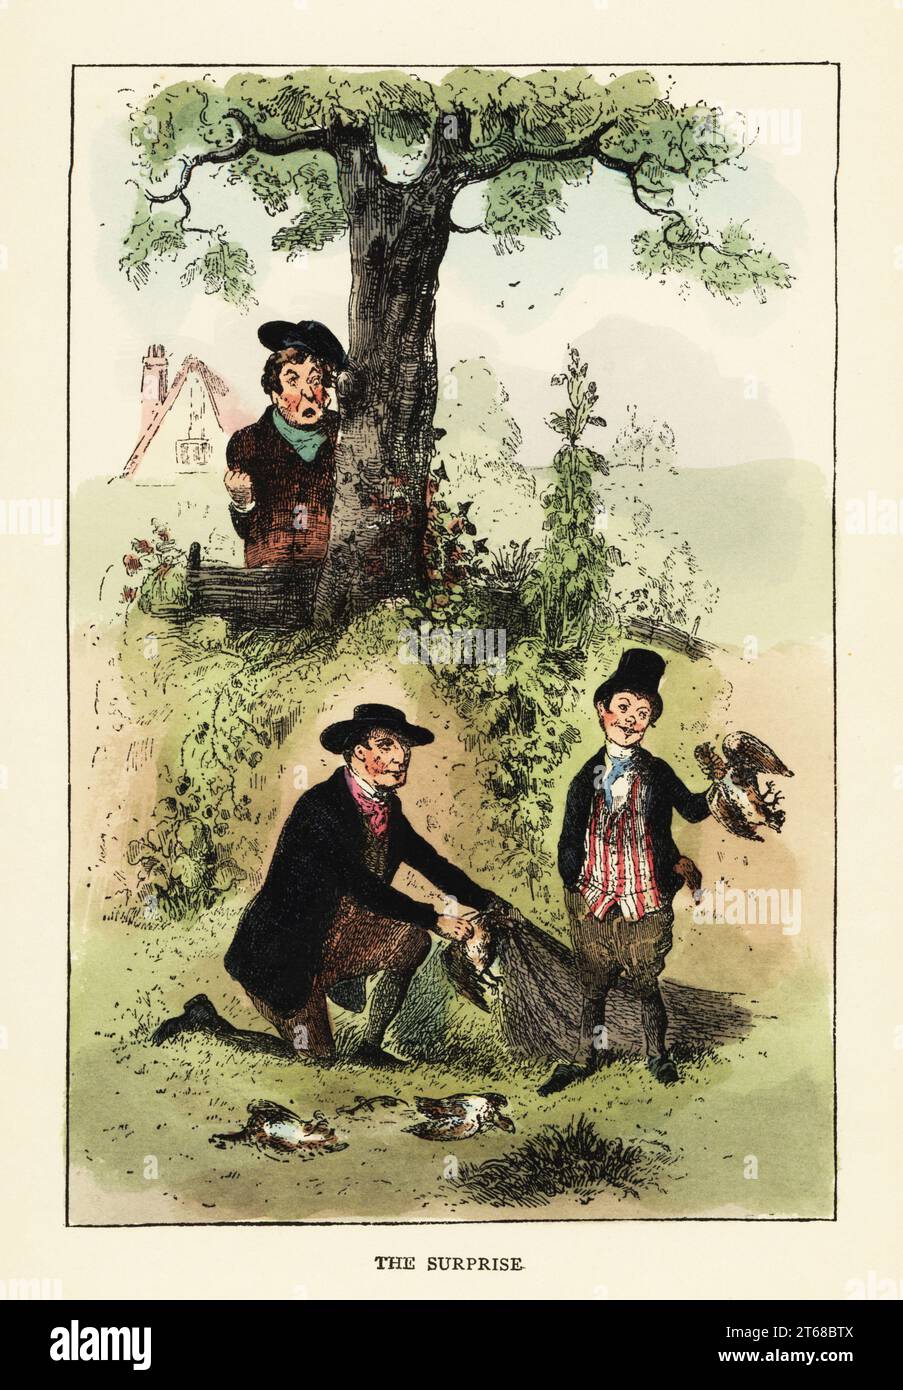 Landowner discovering poachers netting partriduges on his land, 19th century. Mr. Jorrocks sees Benjamin wringing the neck of a partridge that Joshua Sneakington has handed him from a net. The Surprise. Handcoloured steel engraving after an illustration by Wildrake, Heath or Jellicoe from Robert Smith Surtees Hillingdon Hall, or the Cockney Squire, a Tale of Country Life, John C. Nimmo., London, 1844. Stock Photo